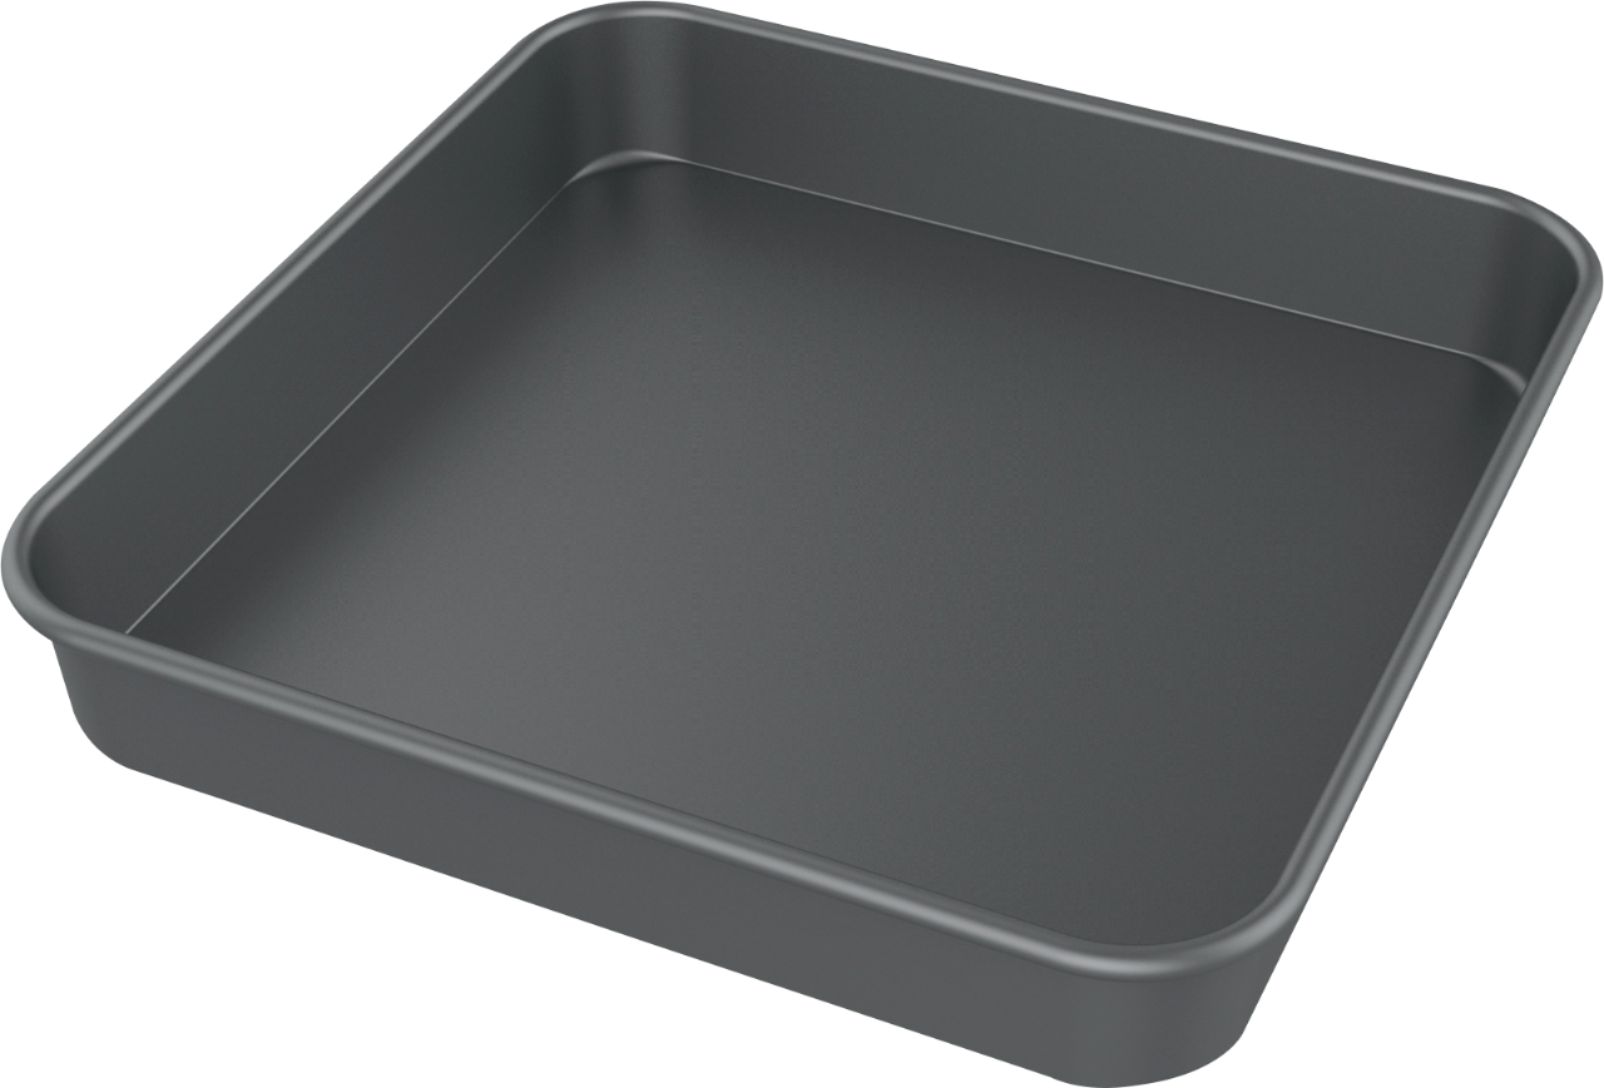 Small Disposable Casserole Pan or Air Fryer Pan - Case of 200 #4600